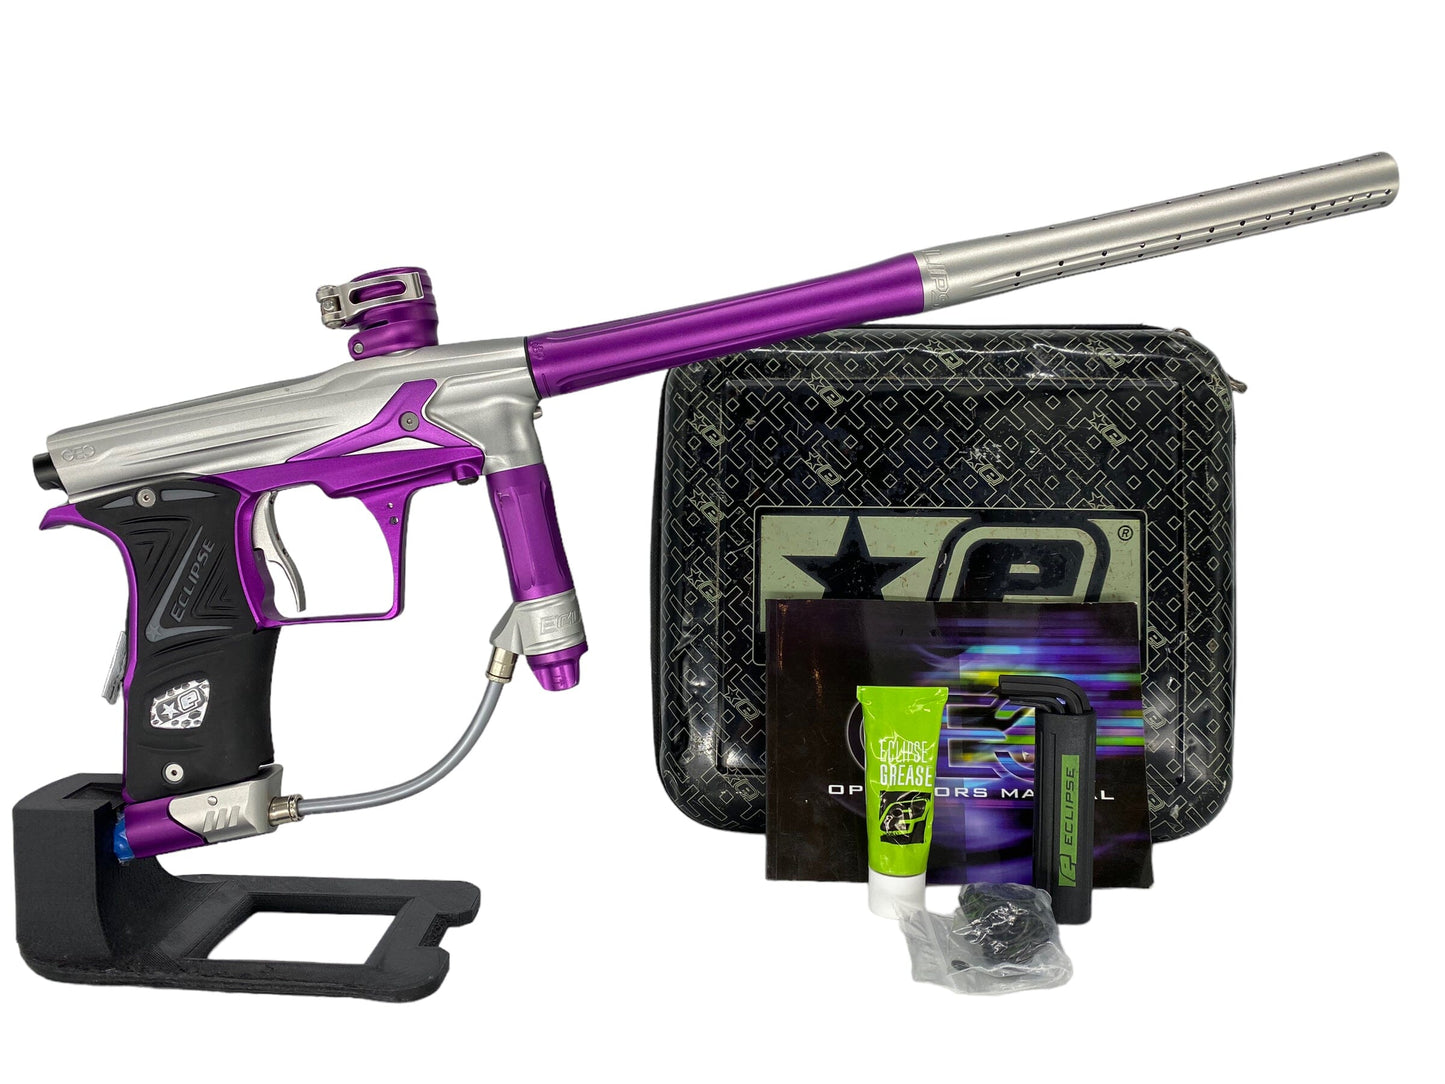 Used Planet Eclipse Geo 3 Paintball Gun from CPXBrosPaintball Buy/Sell/Trade Paintball Markers, Paintball Hoppers, Paintball Masks, and Hormesis Headbands